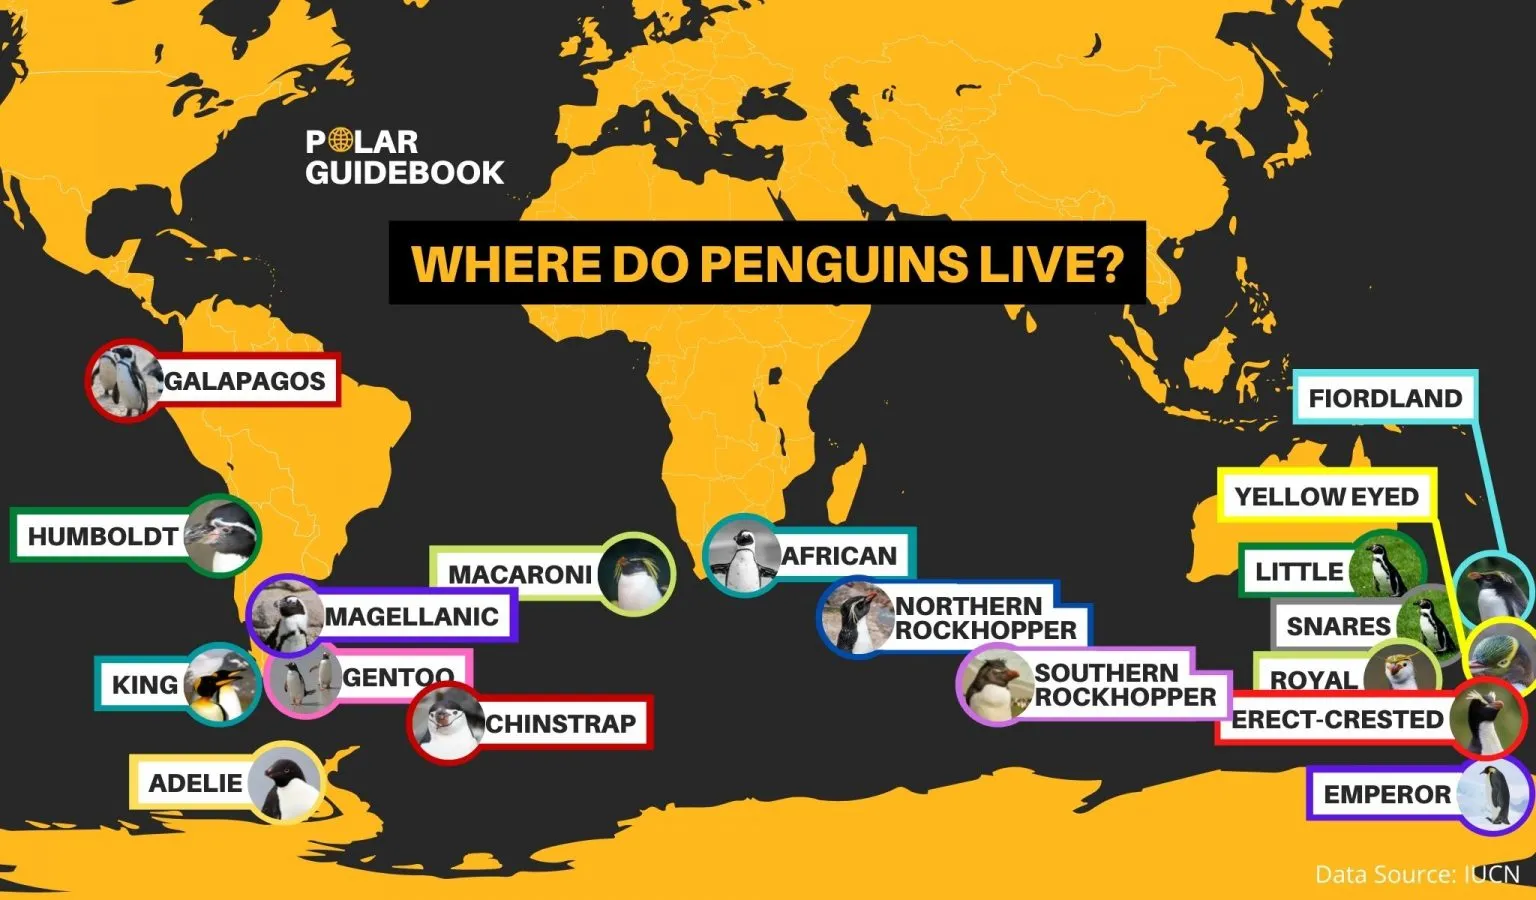 Where Do Penguins Live With Map Polar Guidebook